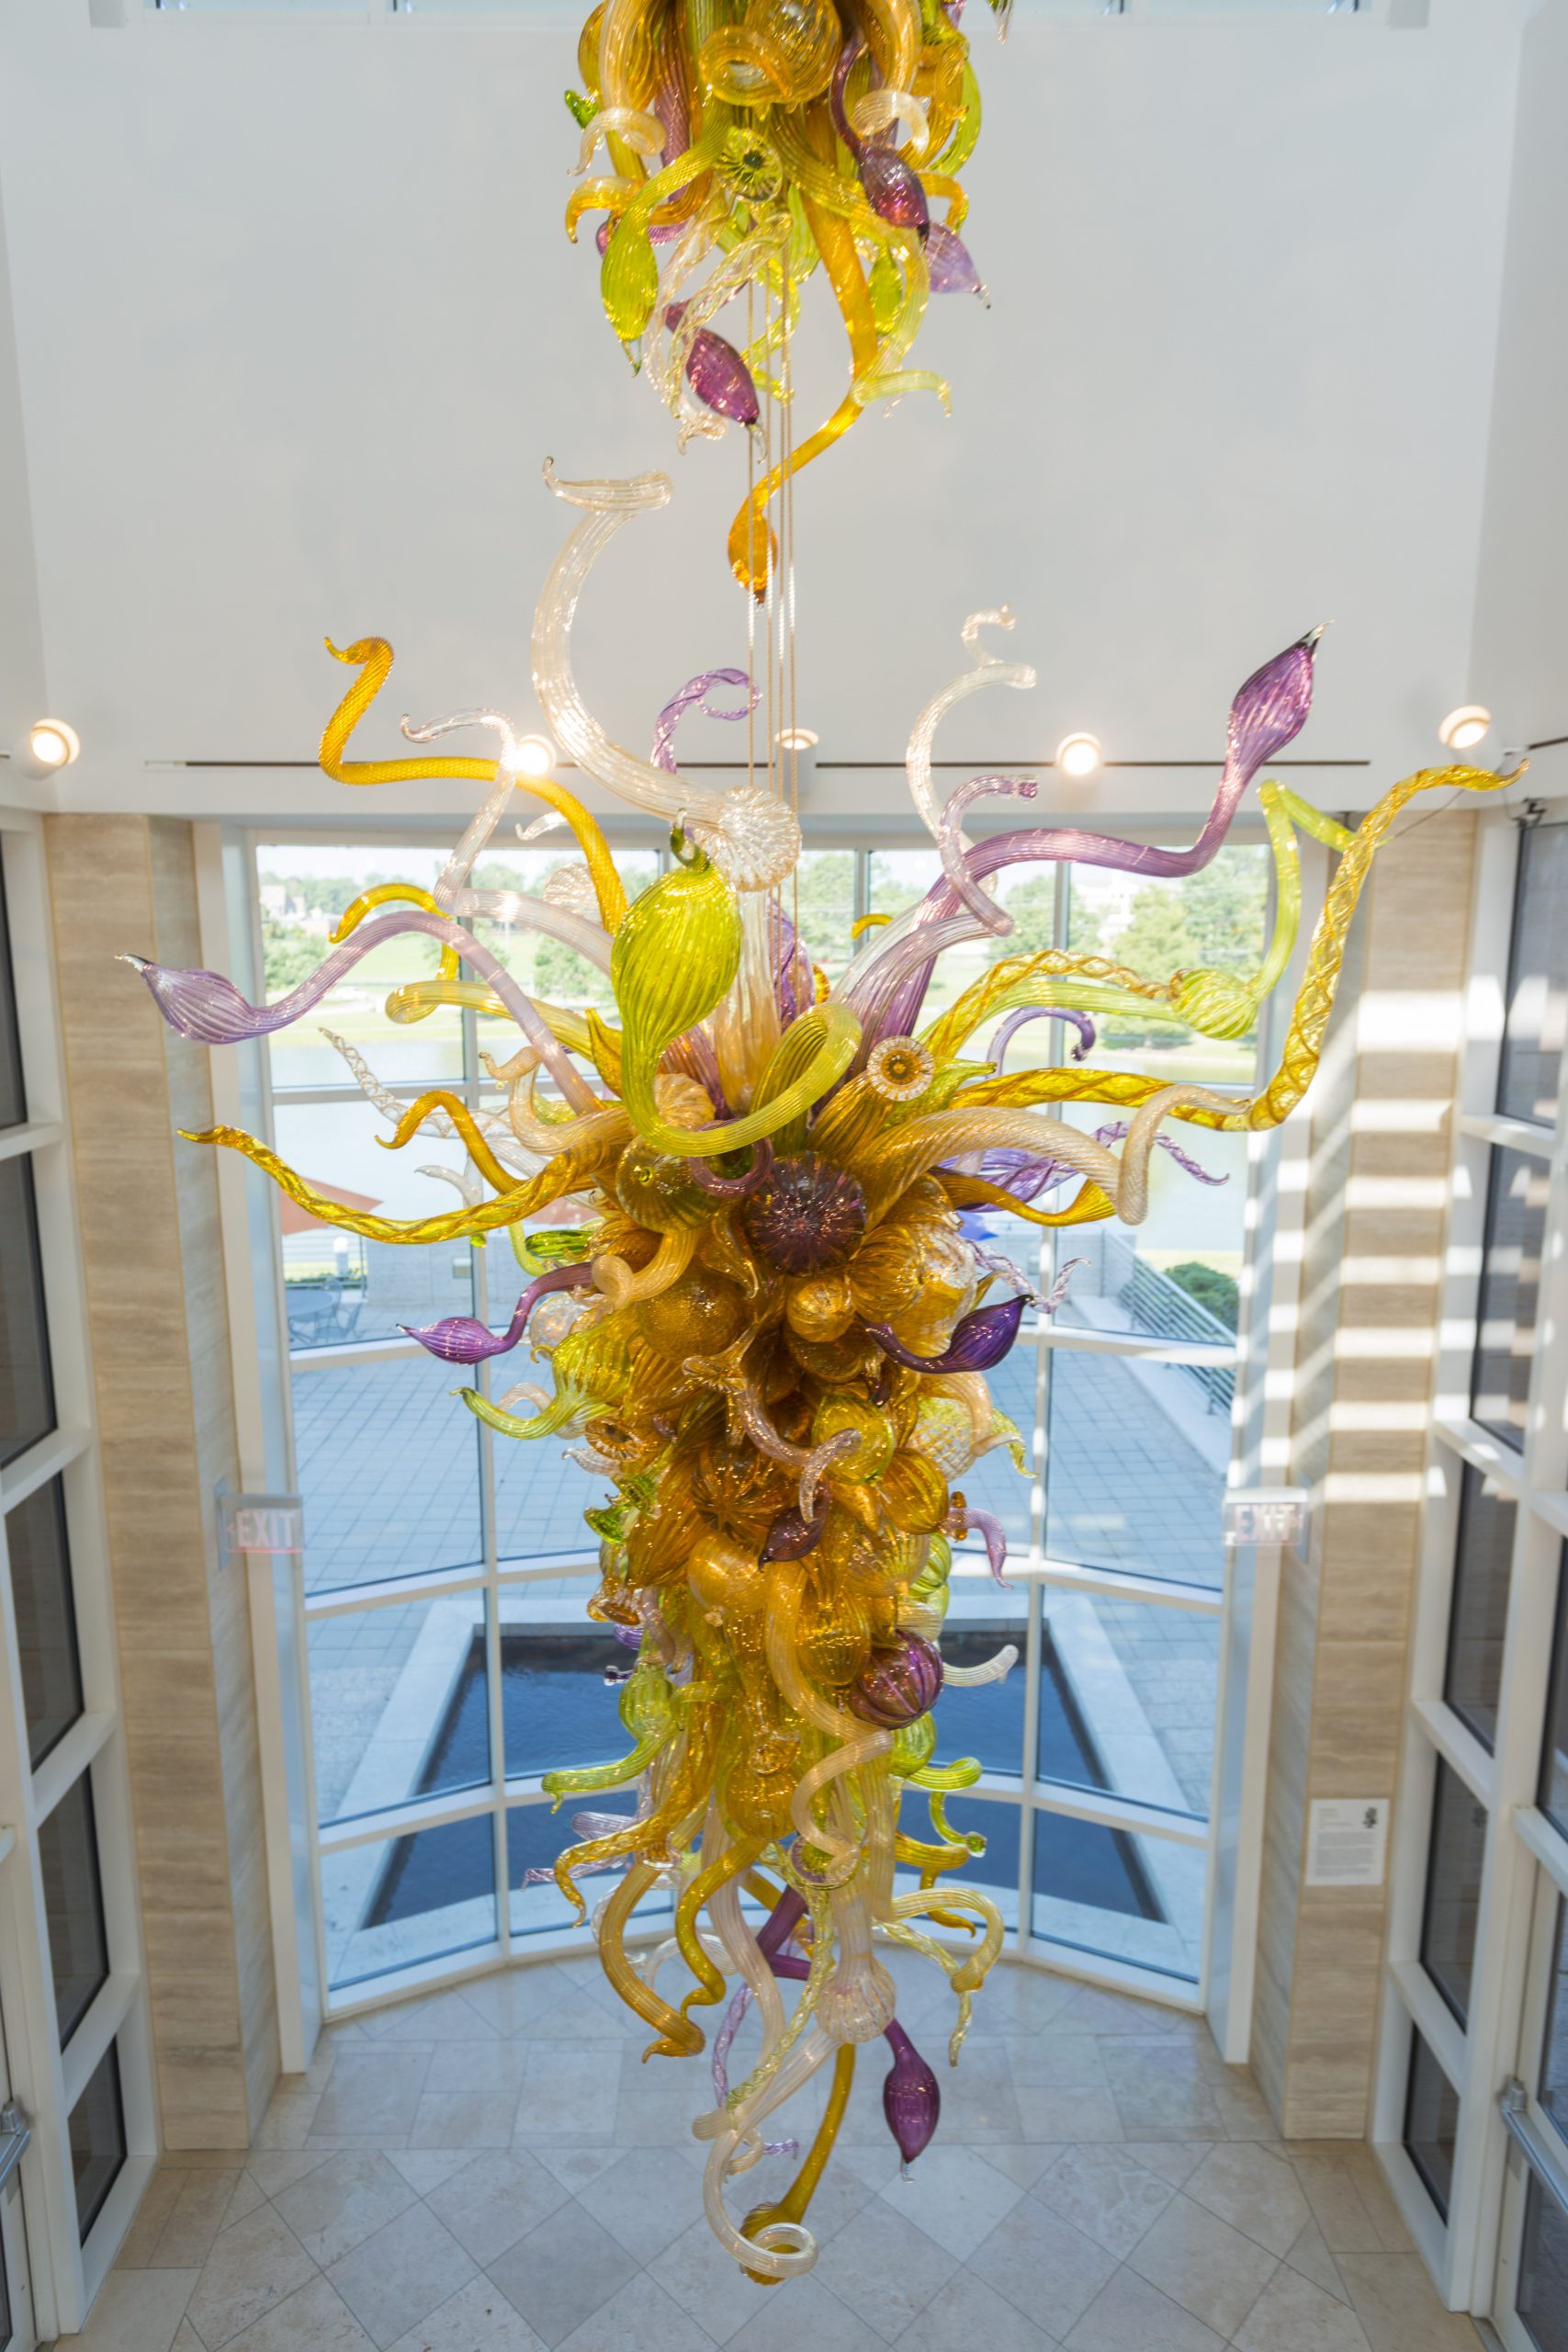 Aerial view of a glass sculpture in the atrium.